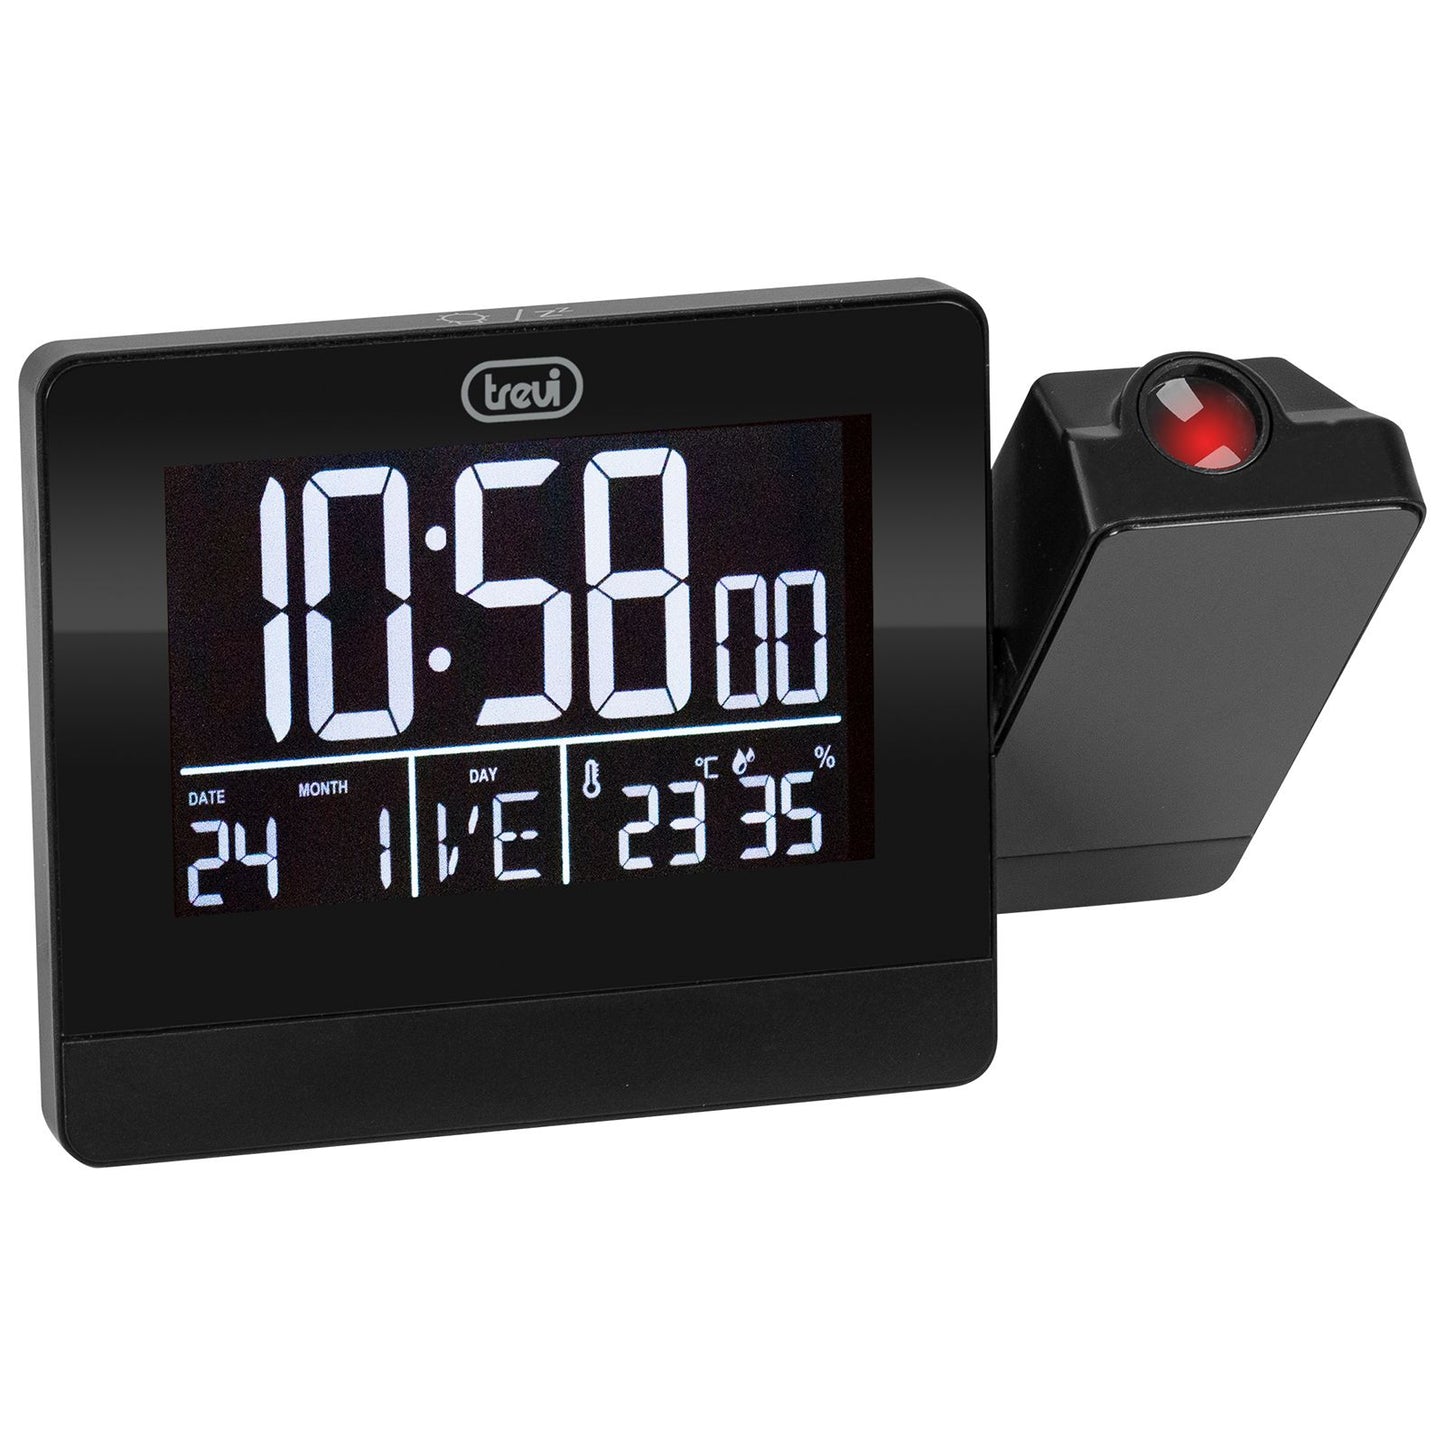 Trevi clock with large display and white lighting, alarm with time projection, rotation adjustment up to 90°